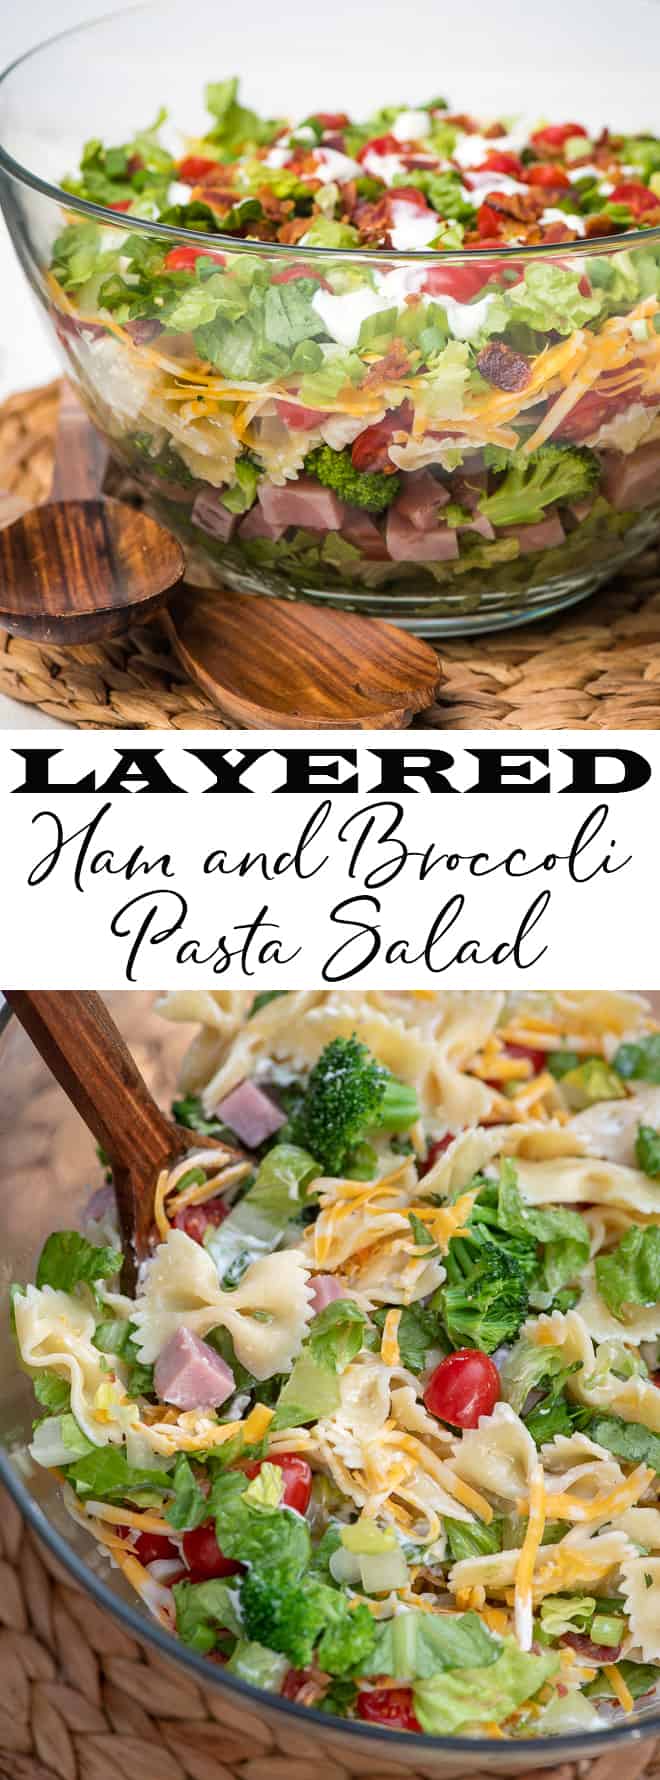 A two image collage of Layered Ham and Broccoli Pasta Salad with overlay text.